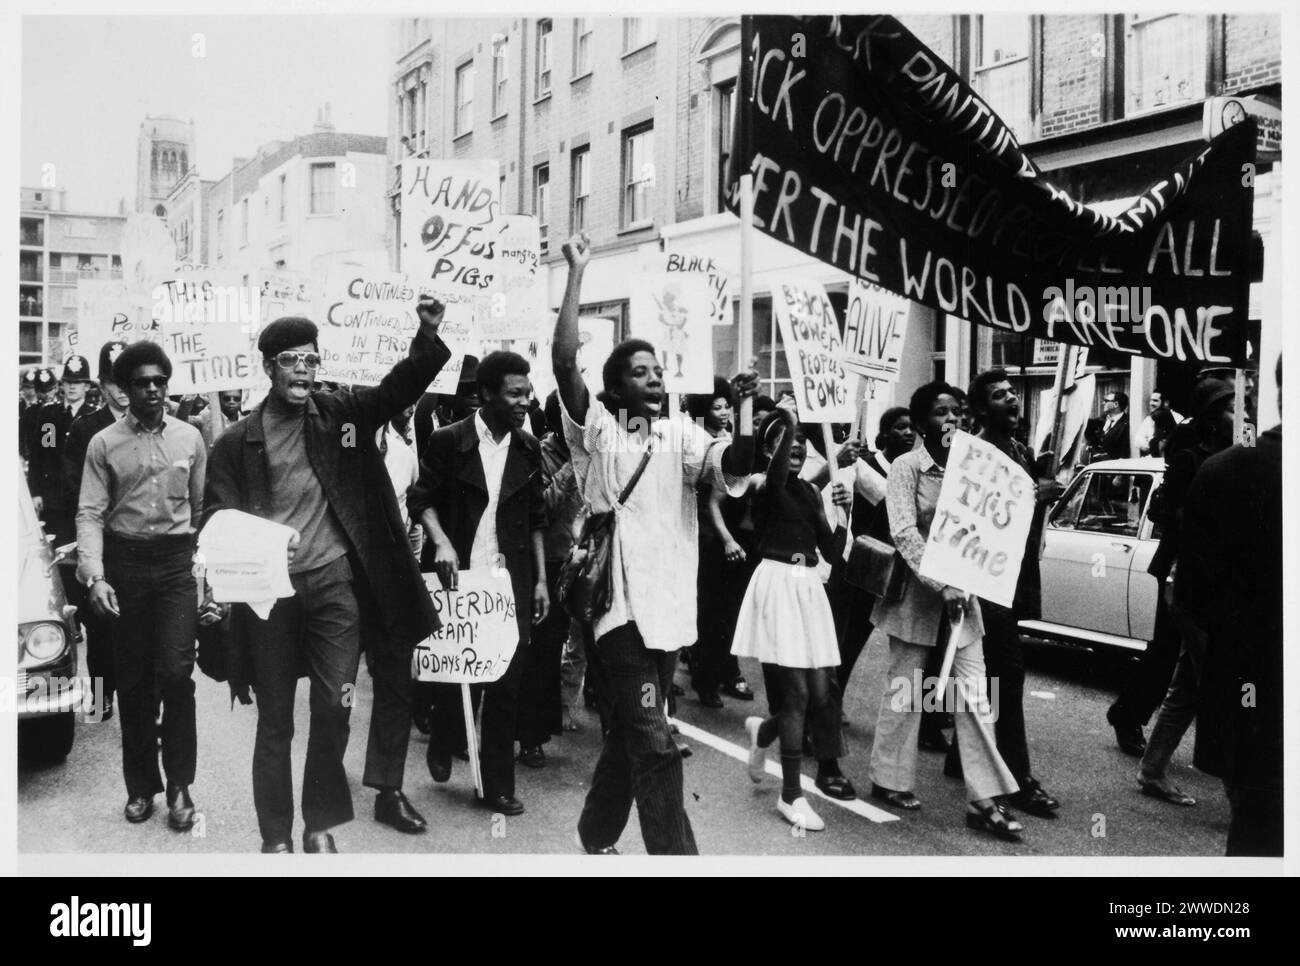 Mangrove Nine protest 1970 Document: Photo from the Mangrove Nine protest, 1970 (MEPO 31/21) Description: On 9 August 1970, a group of activists led 150 people on a march against police harassment of the Black community in Notting Hill, London. They called for the ‘end of the persecution of the Mangrove Restaurant’. Between January 1969 and July 1970, the police had raided the Mangrove Restaurant twelves times. No evidence of illegal activity was found during these raids. Nine men and women were put on trial at the Old Bailey for causing a riot at the march. These men and women became known na Stock Photo